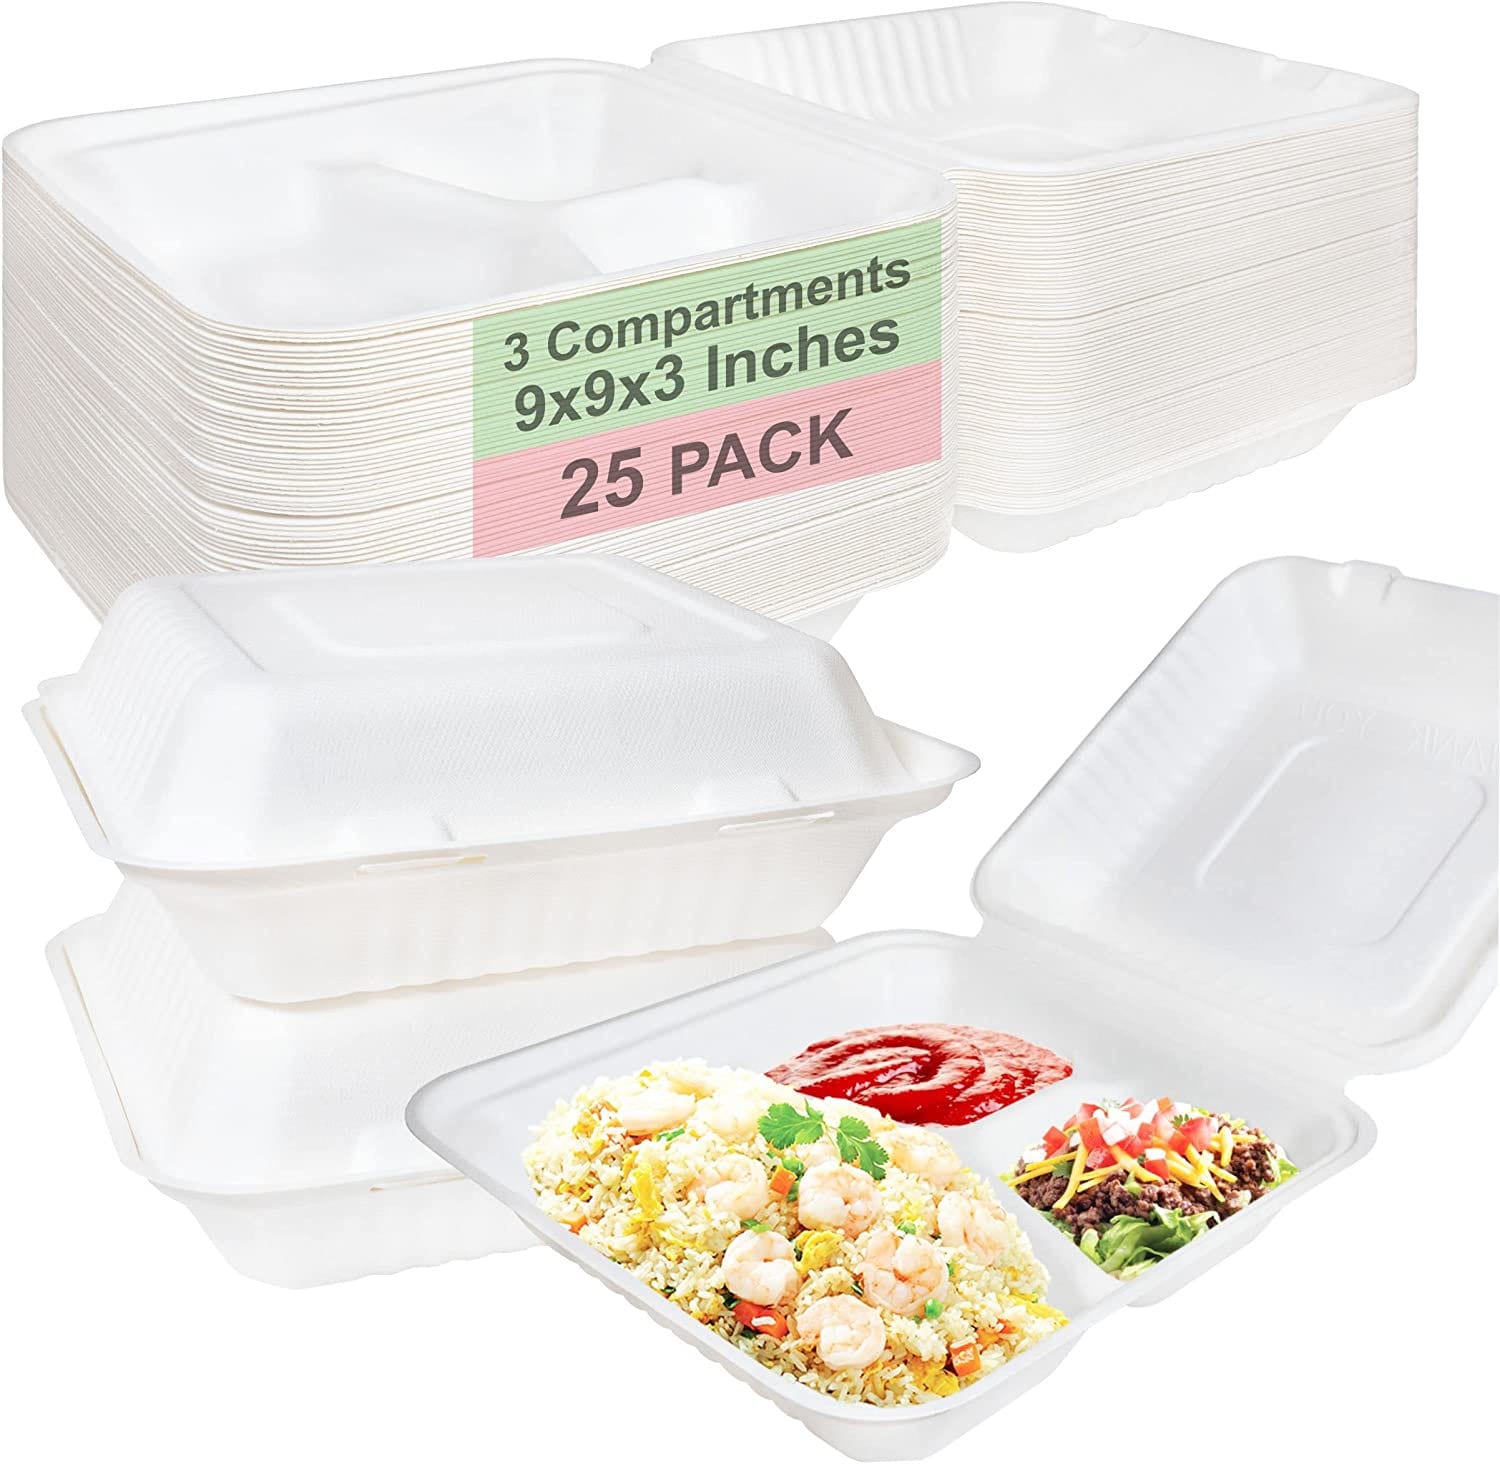 [150 Pack] Reusable 38 oz Food Storage Containers with Lids by EcoQuality Rectangular BPA Free Freezer, Microwave & Dishwasher Safe Airtight 